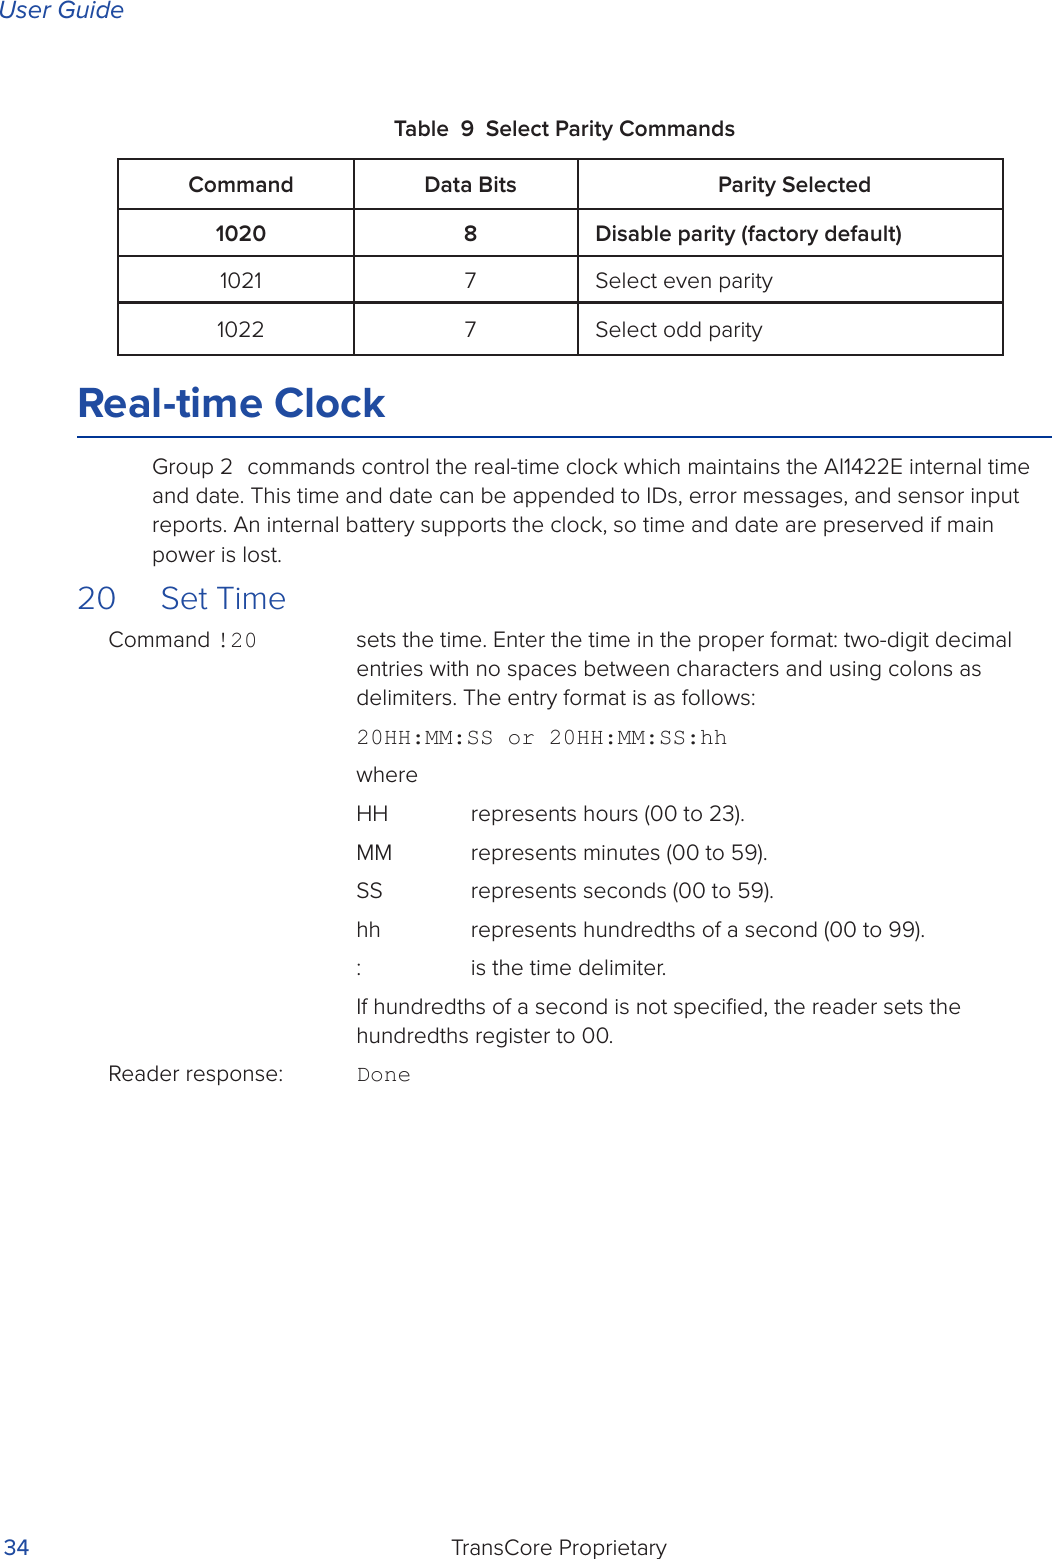 User GuideTransCore Proprietary 34Table 9 Select Parity CommandsReal-time ClockGroup 2 commands control the real-time clock which maintains the AI1422E internal time and date. This time and date can be appended to IDs, error messages, and sensor input reports. An internal battery supports the clock, so time and date are preserved if main power is lost.20   Set TimeCommand !20   sets the time. Enter the time in the proper format: two-digit decimal entries with no spaces between characters and using colons as delimiters. The entry format is as follows:20HH:MM:SS or 20HH:MM:SS:hhwhereHH  represents hours (00 to 23).MM  represents minutes (00 to 59).SS  represents seconds (00 to 59).hh  represents hundredths of a second (00 to 99).:  is the time delimiter.If hundredths of a second is not speciﬁed, the reader sets the hundredths register to 00. Reader response:  DoneCommand Data Bits Parity Selected1020 8 Disable parity (factory default)1021 7 Select even parity1022 7 Select odd parity